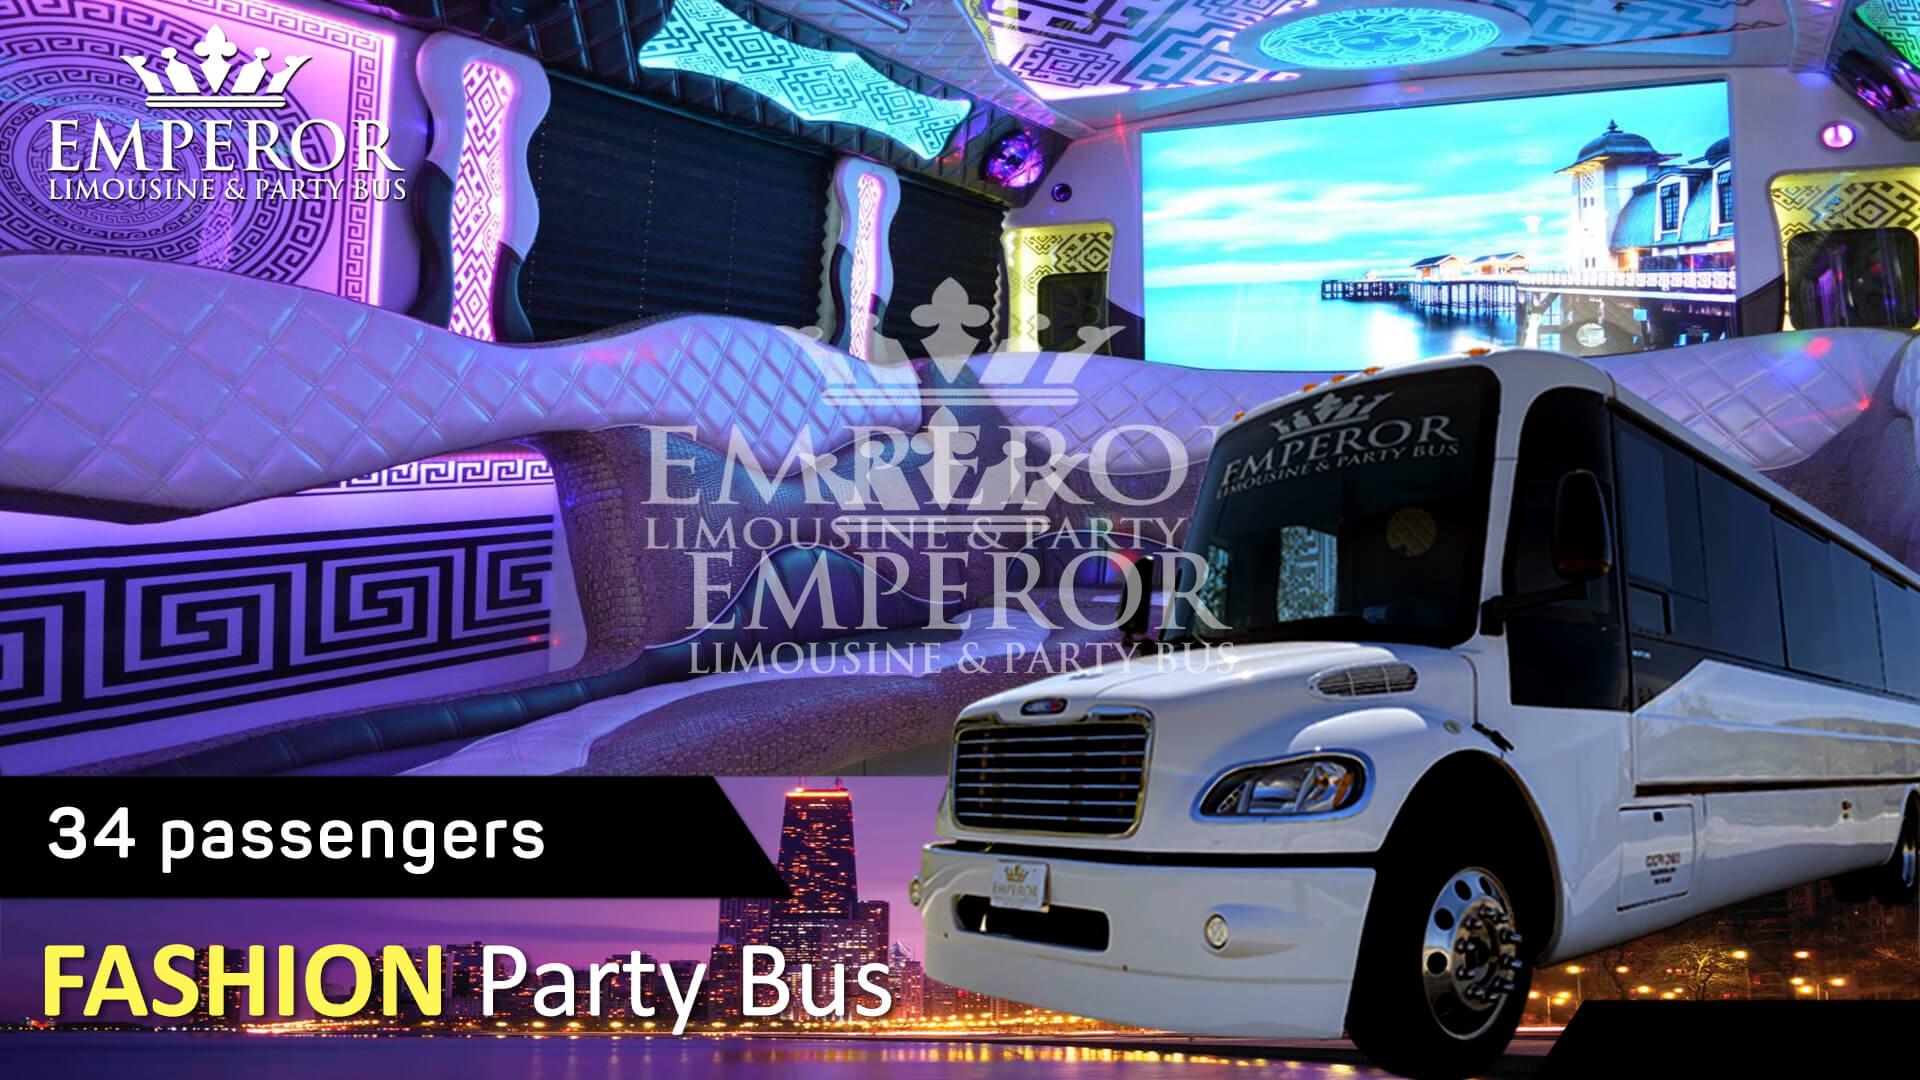 Bachelor Party bus service - Fashion Edition